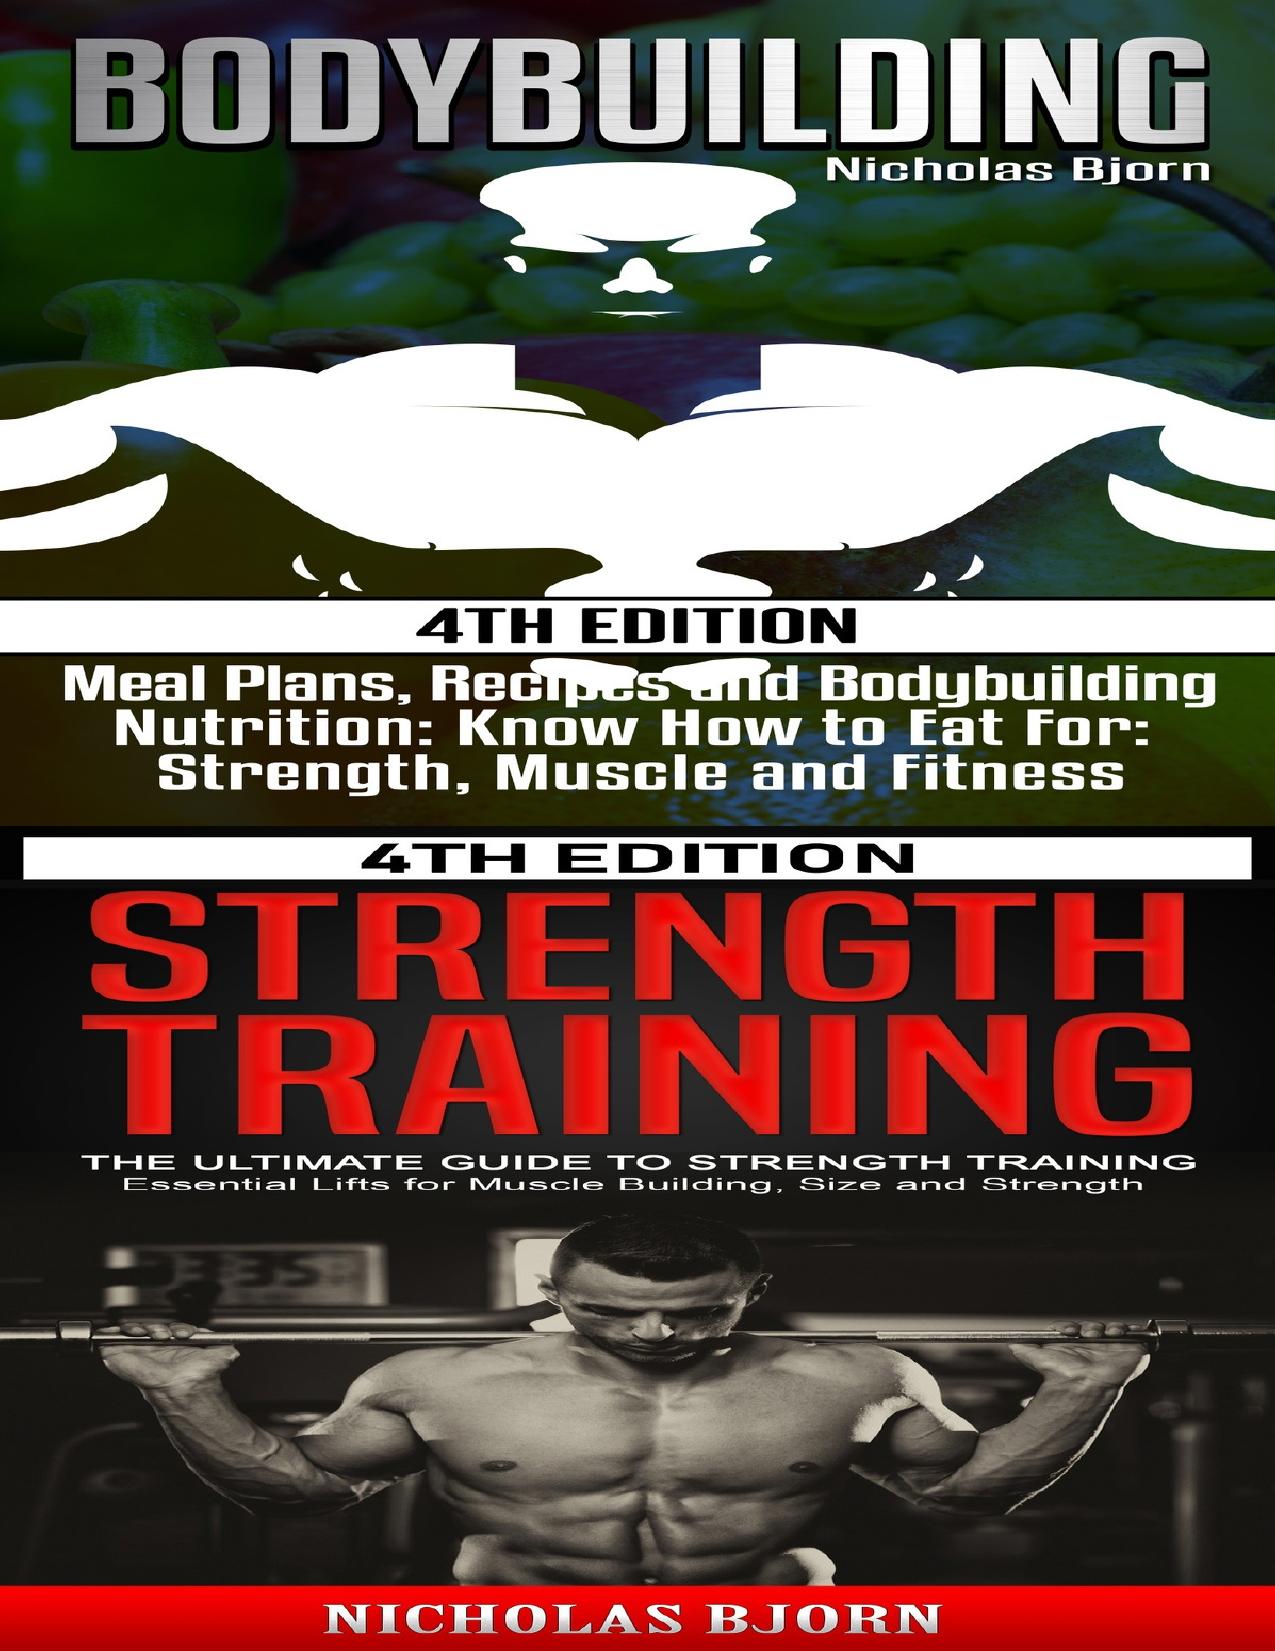 Bodybuilding & Strength Training: Meal Plans, Recipes and Bodybuilding Nutrition & The Ultimate Guide to Strength Training by Bjorn Nicholas